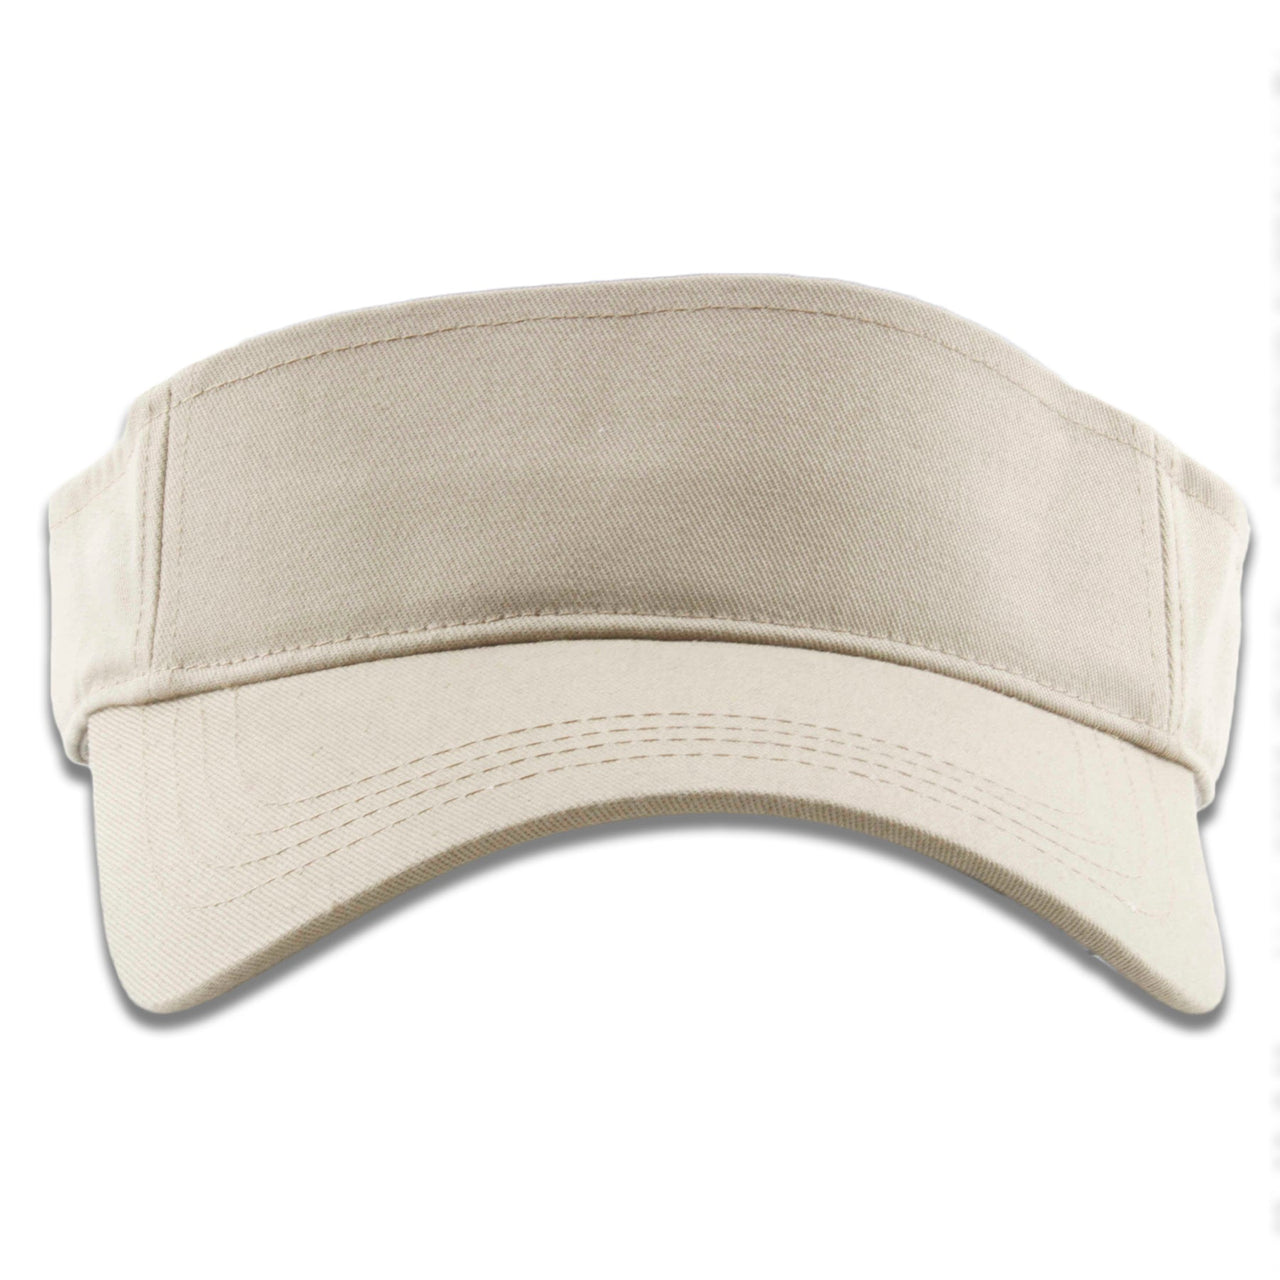 The khaki blank visor is solid khaki with a bent brim and a mid-height visor